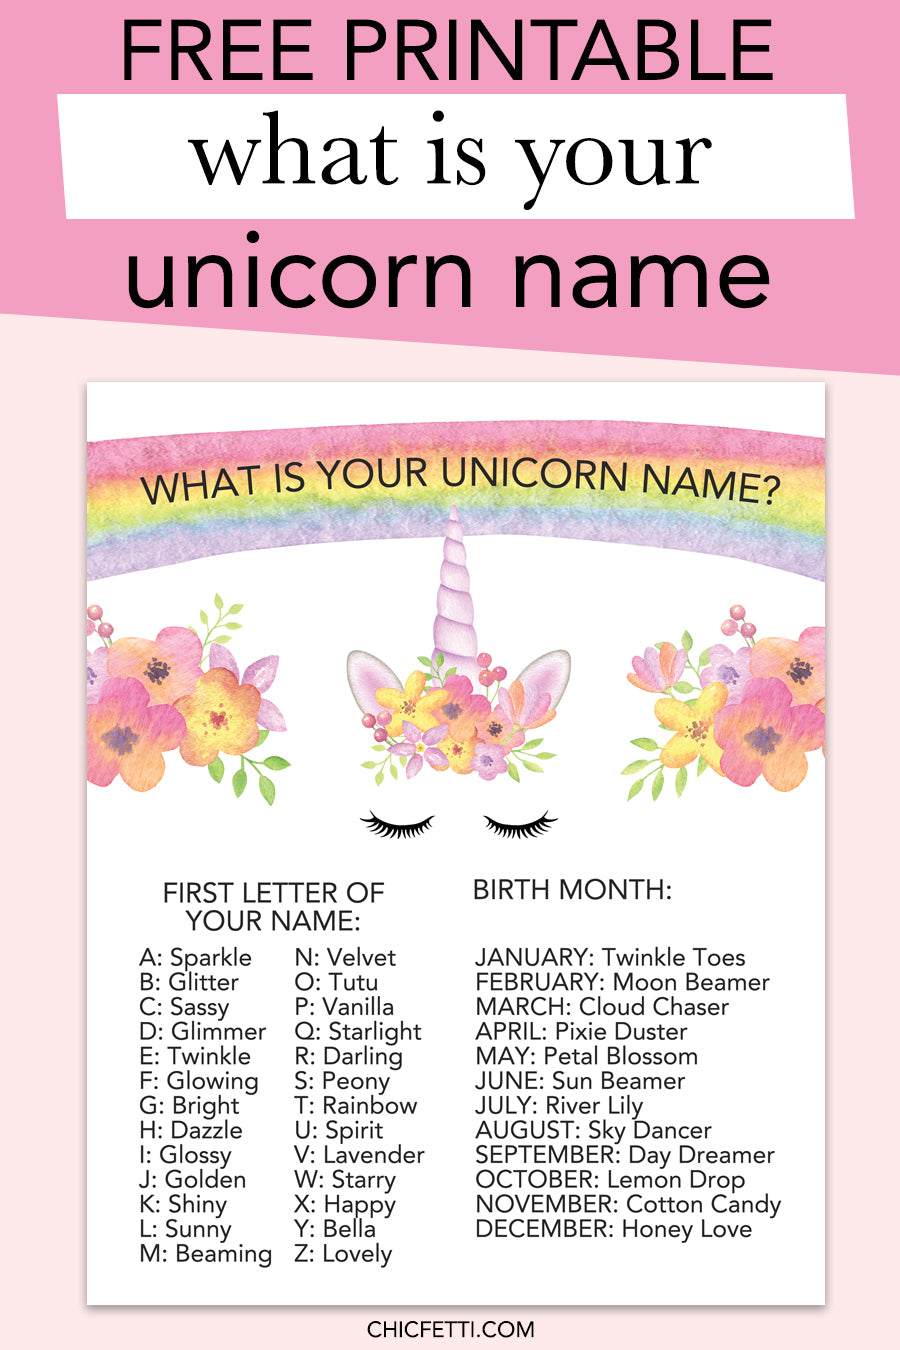 What Is Your Unicorn Name Free Printable Chicfetti 5851